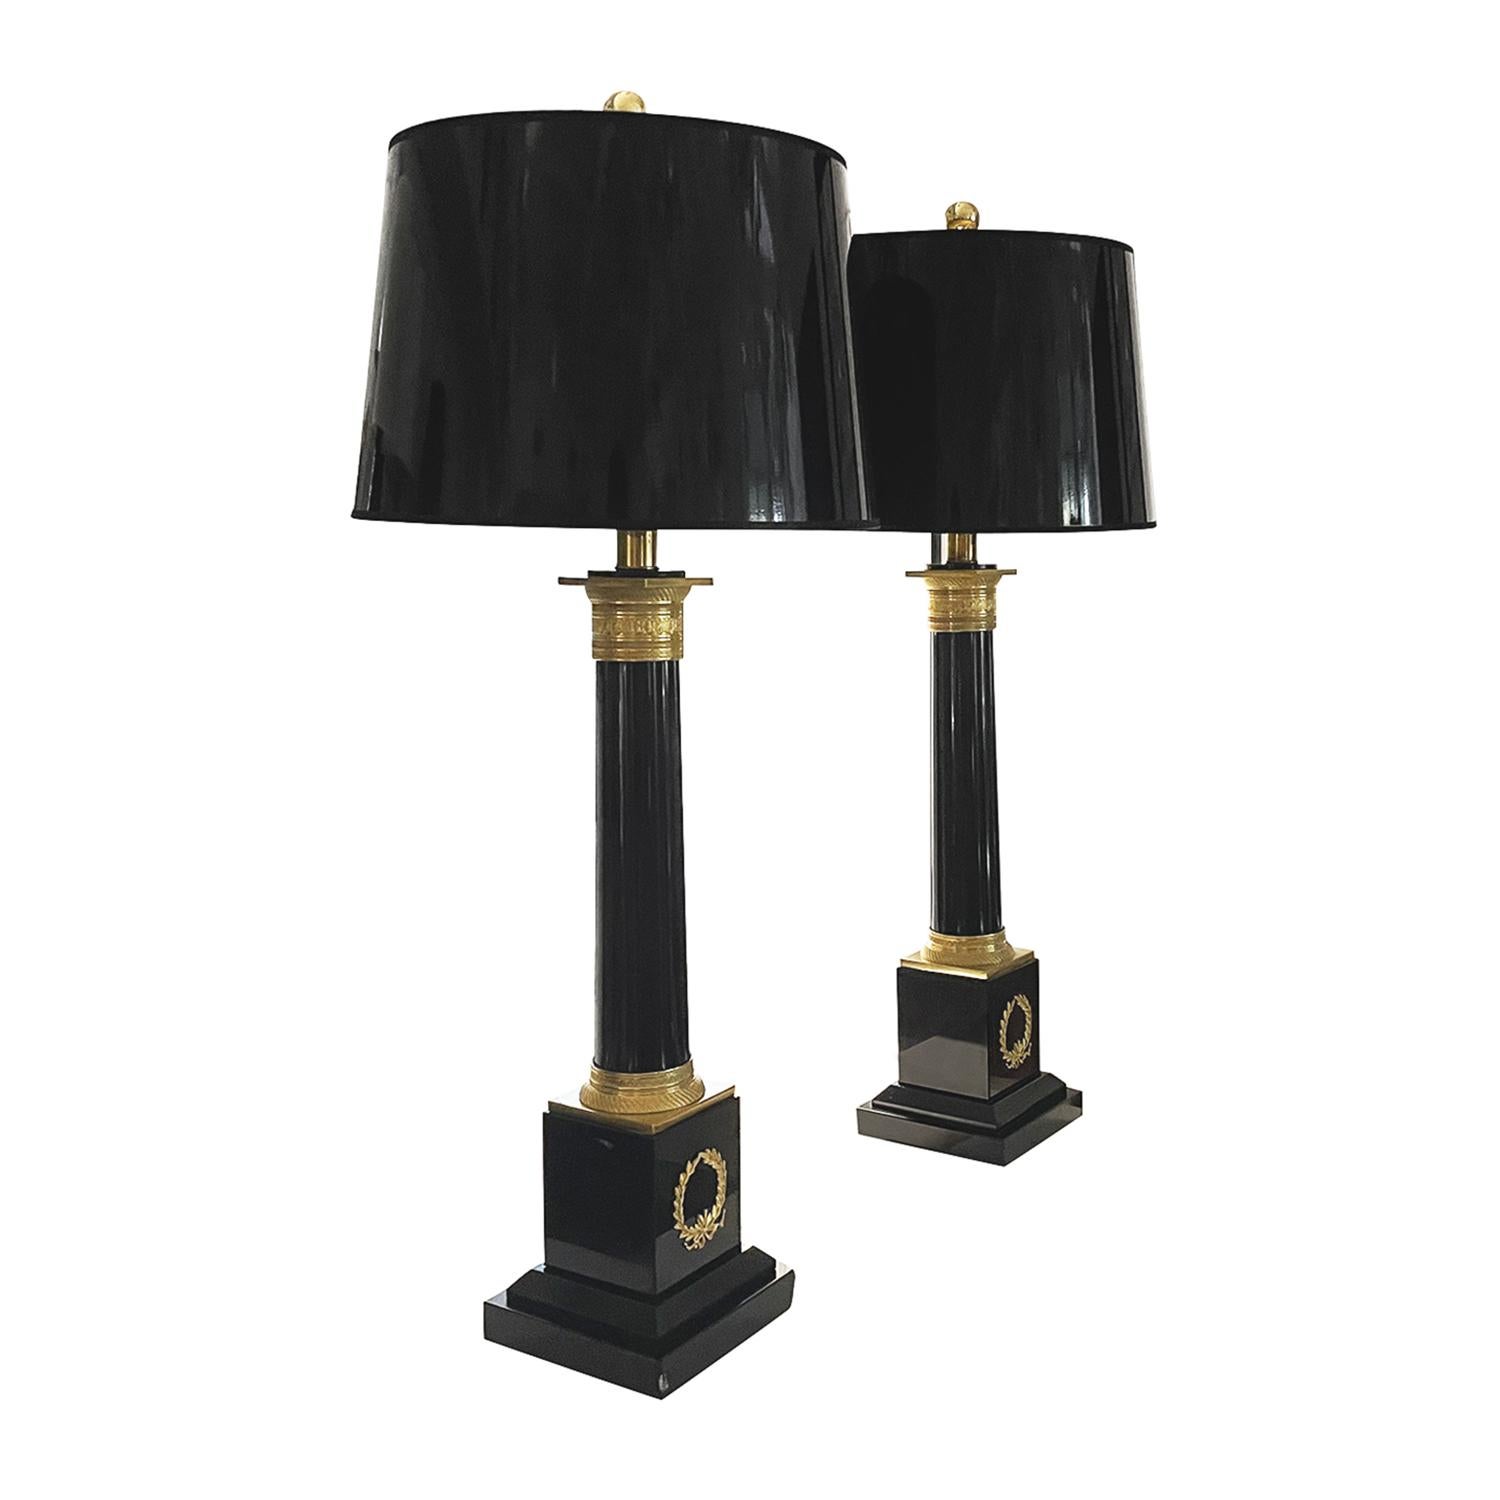 A black, vintage French pair of large table lamps made of hand crafted marble with a new round shade, in good condition. They are composed with its original switch, particularized by gilded bronze décor, featuring a one light socket. The Parisian